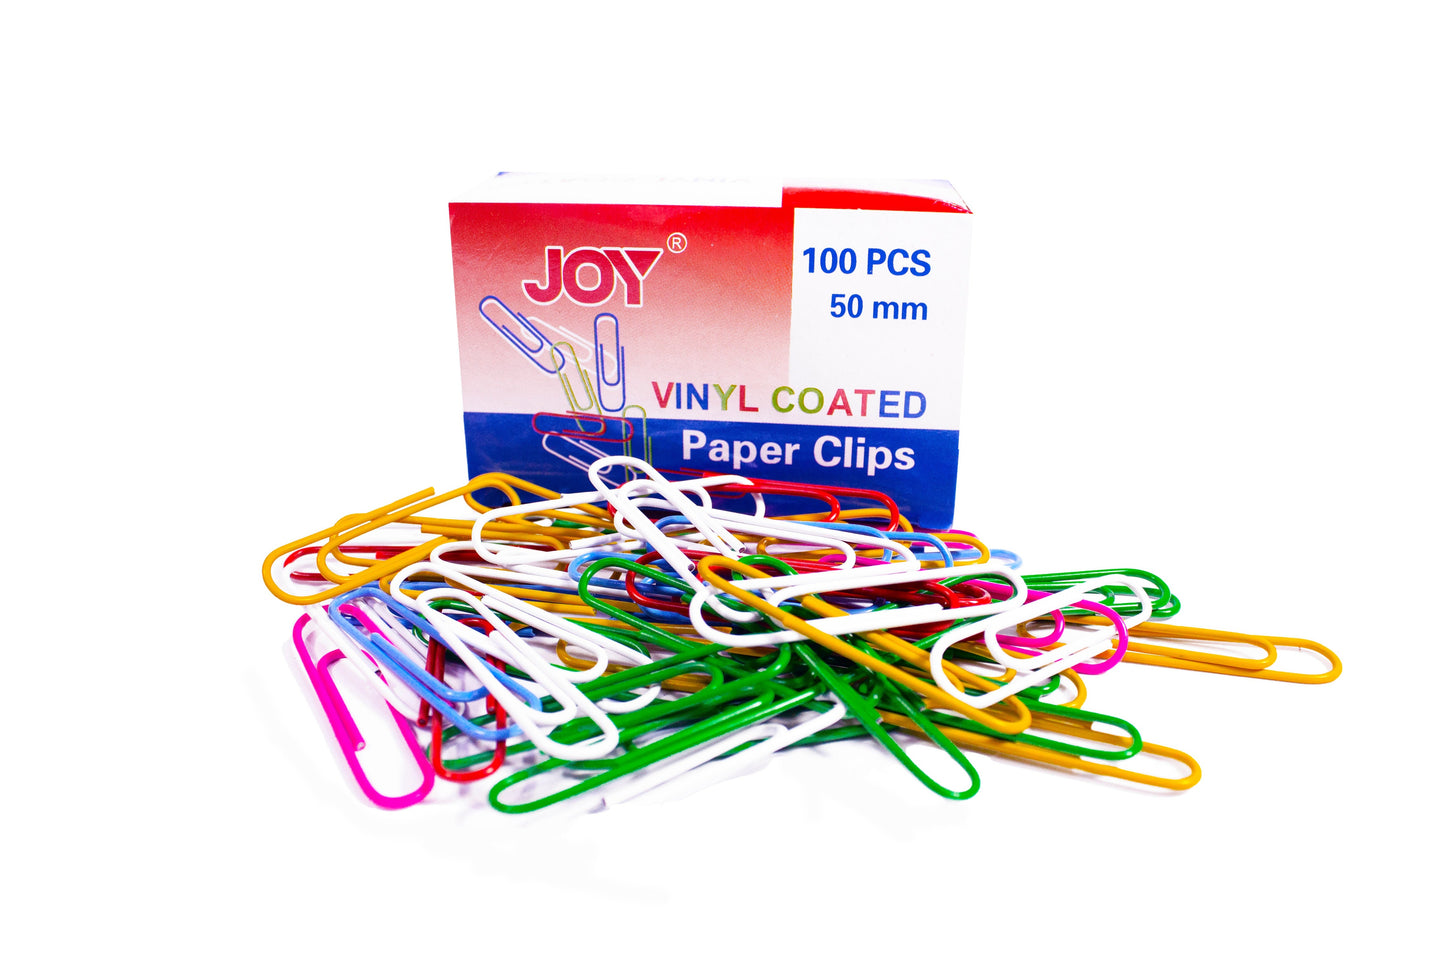 Joy Paper Clips Vinyl Coated 100pcs/pack | Sold by 10s